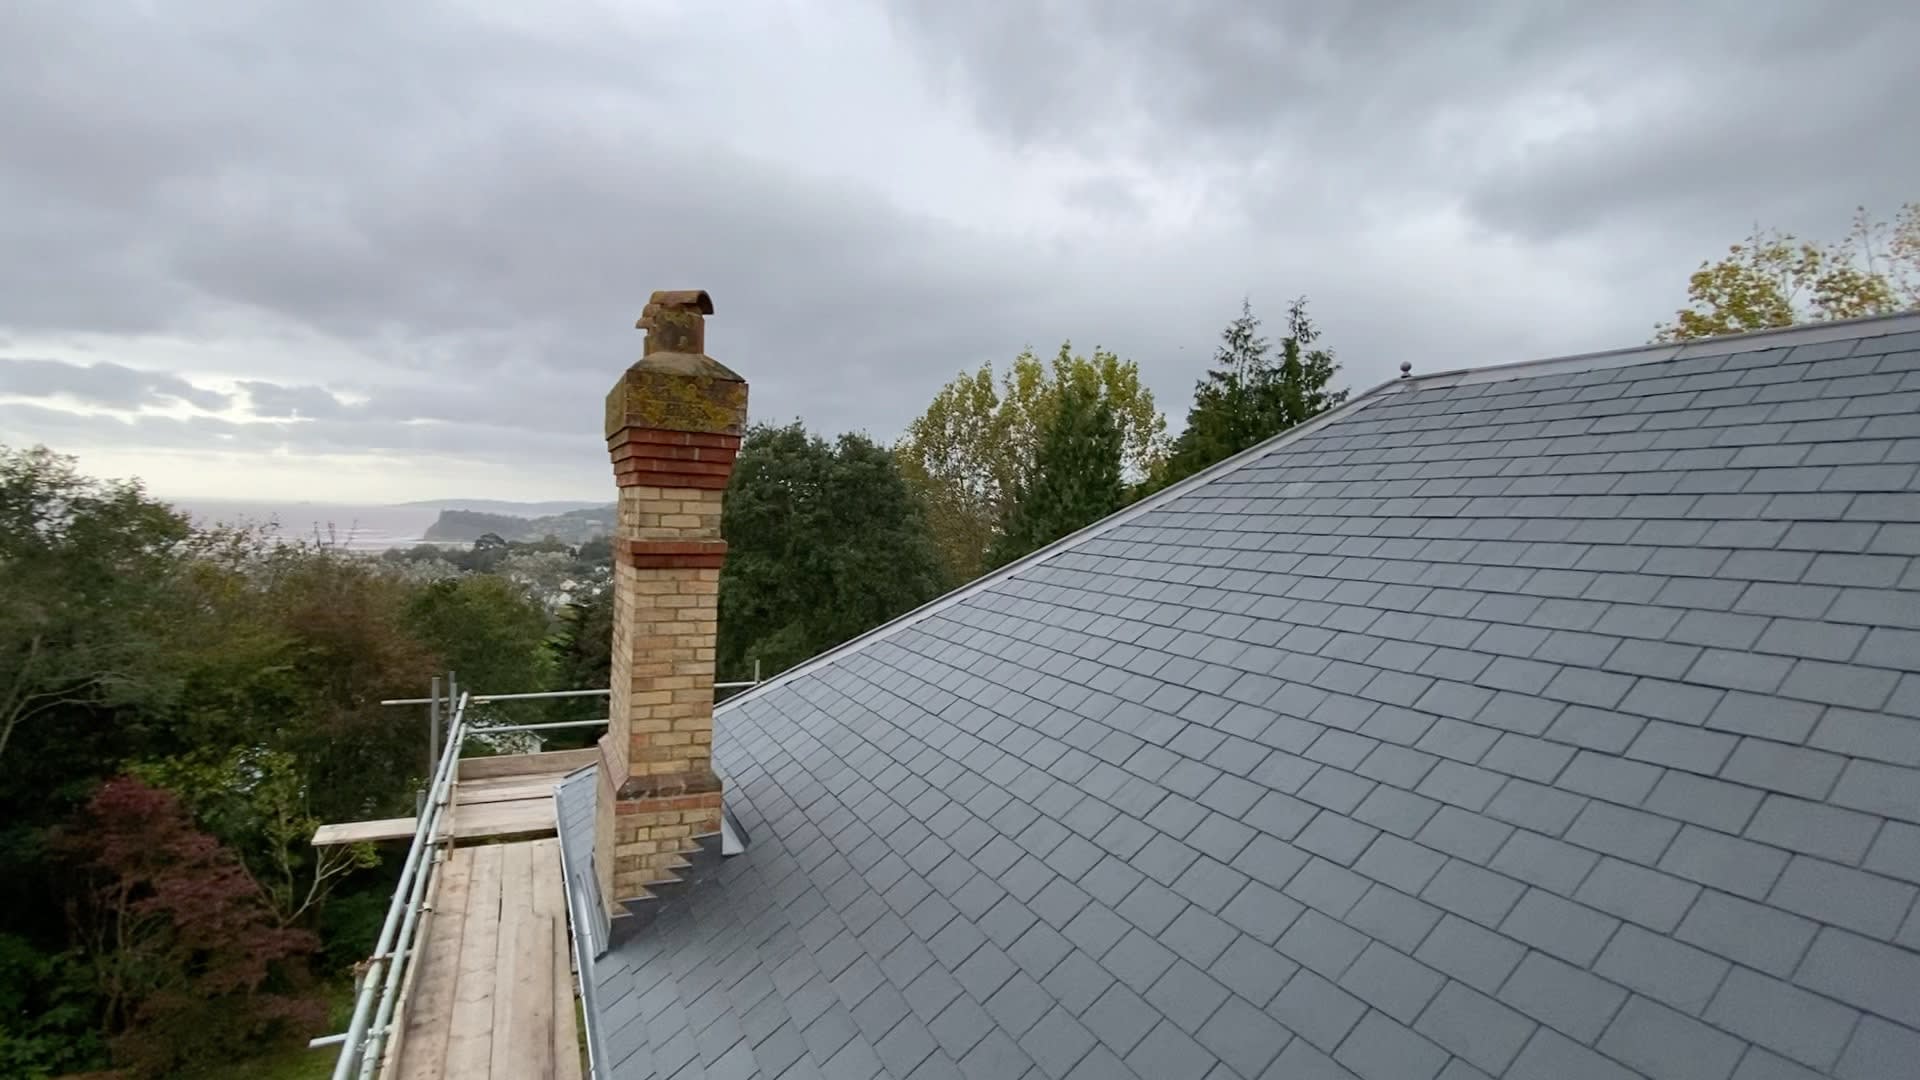 Images Clemence Roofing Ltd